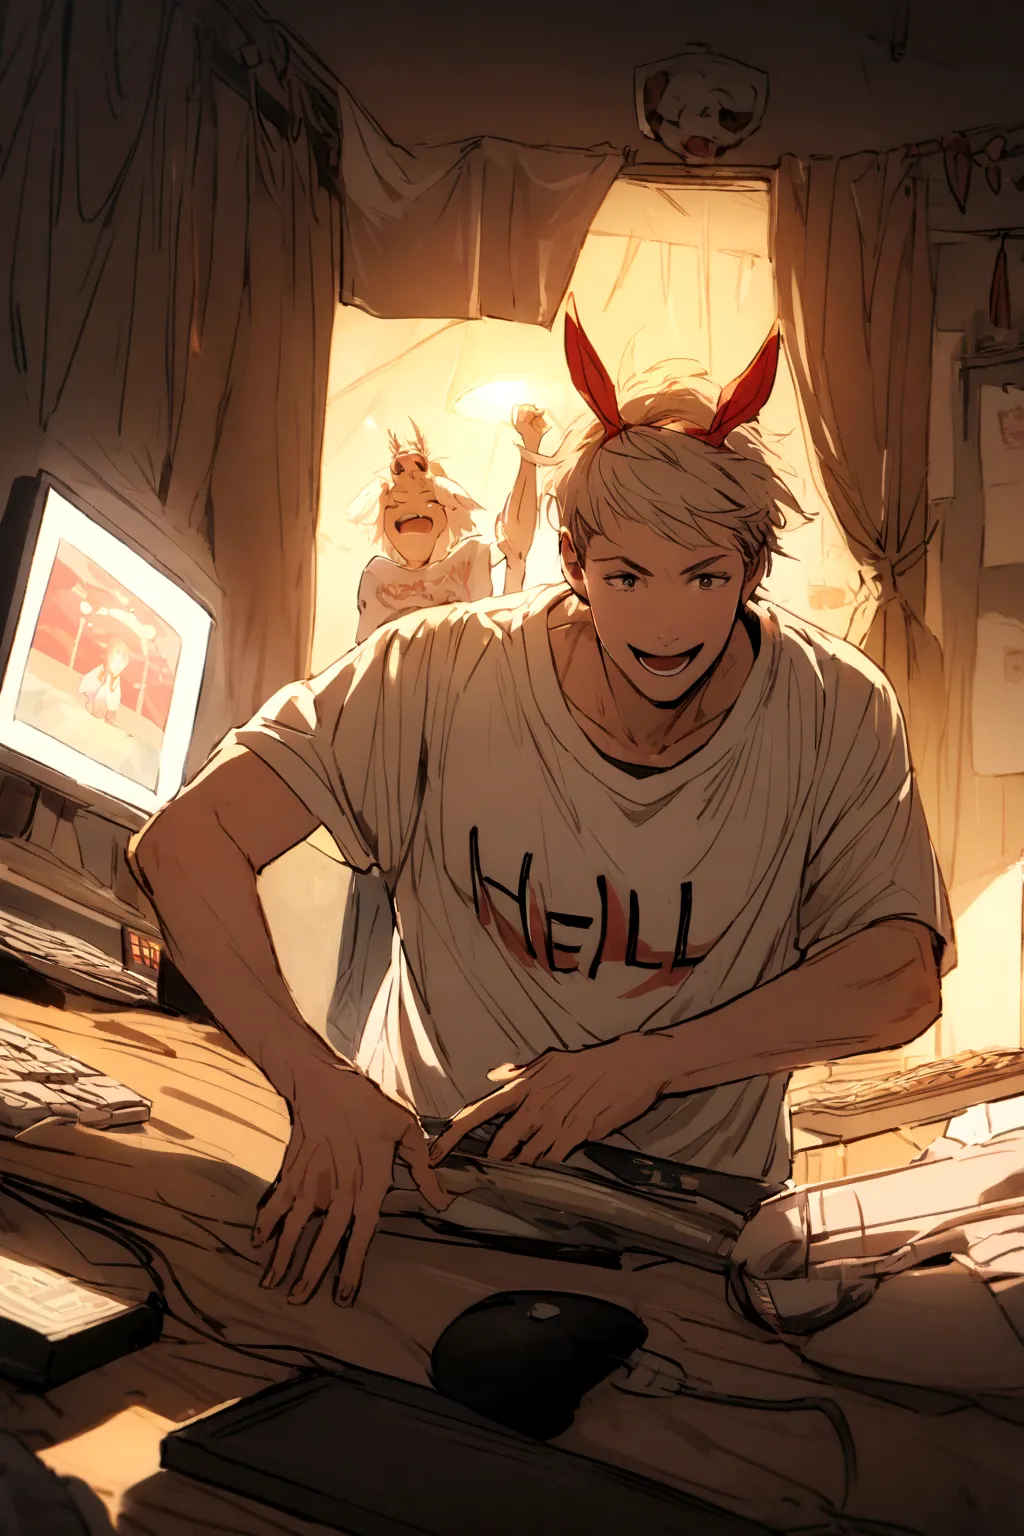 A Power,playing on a PC,all happy and cheerful,wearing a shirt written, Harl,in the middle, of the shirt.